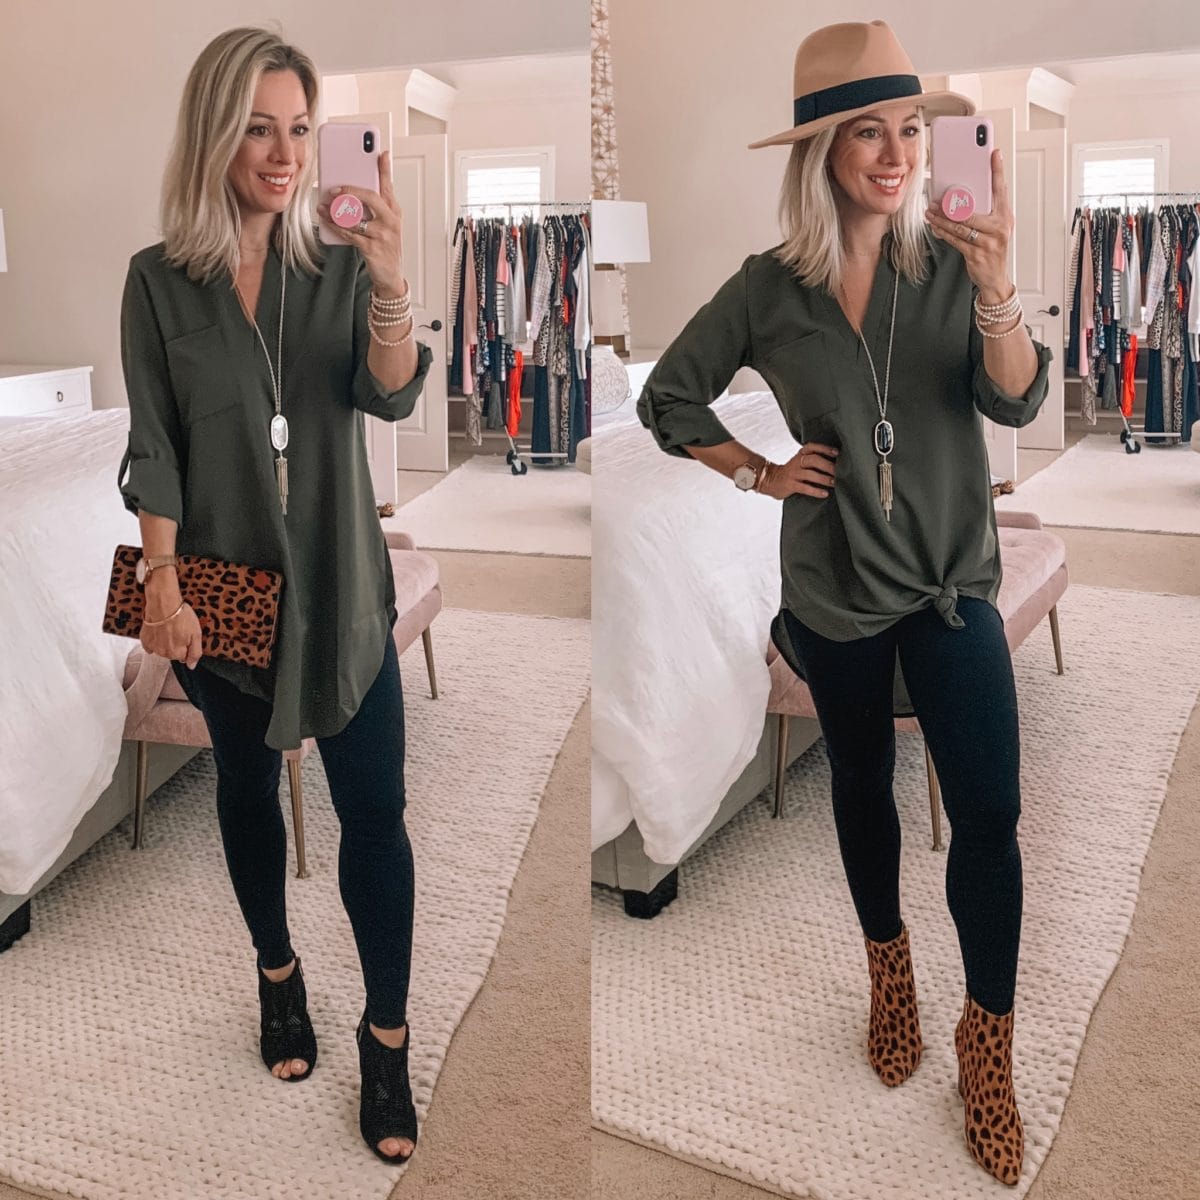 Amazon Fashion Faves, Gree Tunic Top, Leggings, Booties, Leopard Clutch